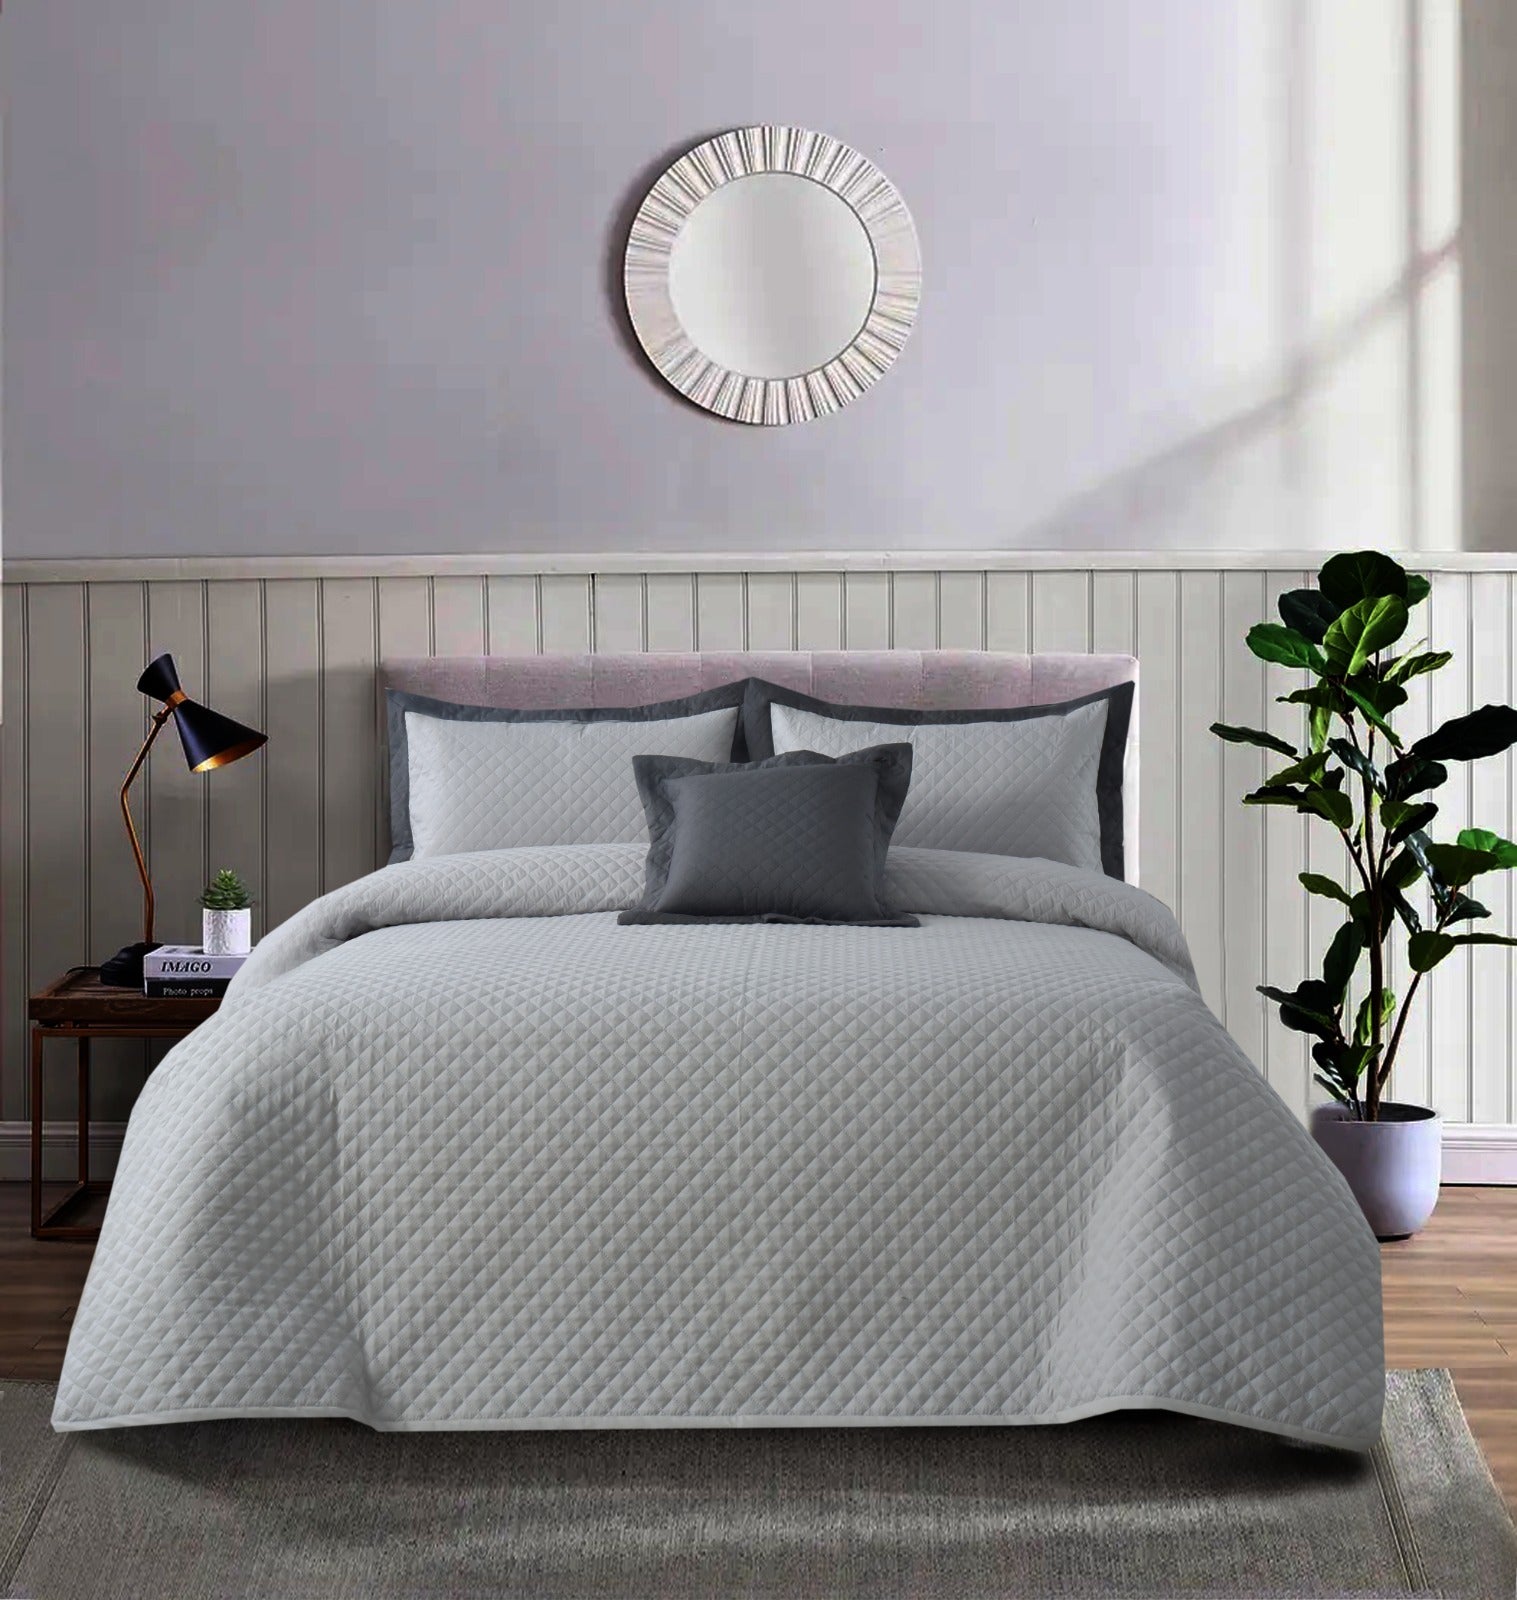 4 PCs Ultrasonic Quilted Luxury Bed Spread Set-Silver Over Grey Apricot